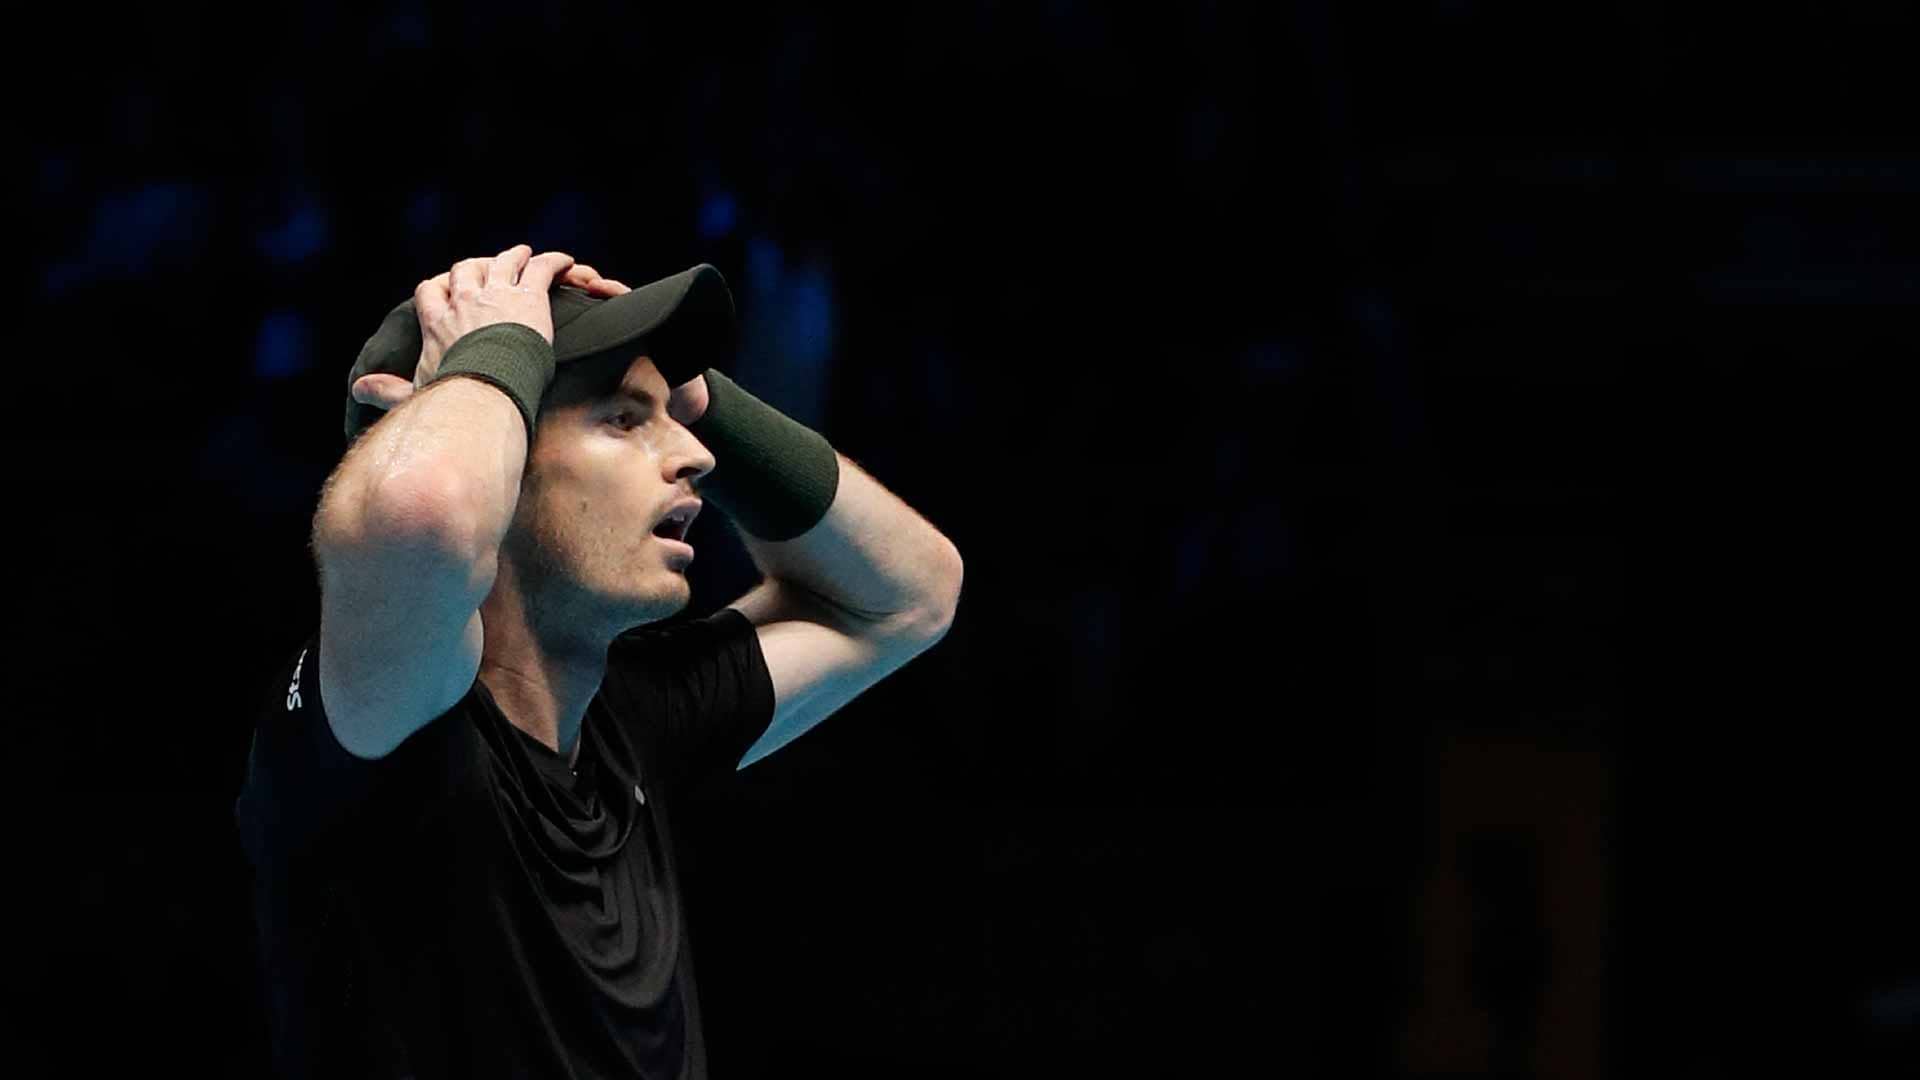 Andy Murray reacts to winning the 2016 Barclays ATP World Tour Finals title over rival Novak Djokovic.